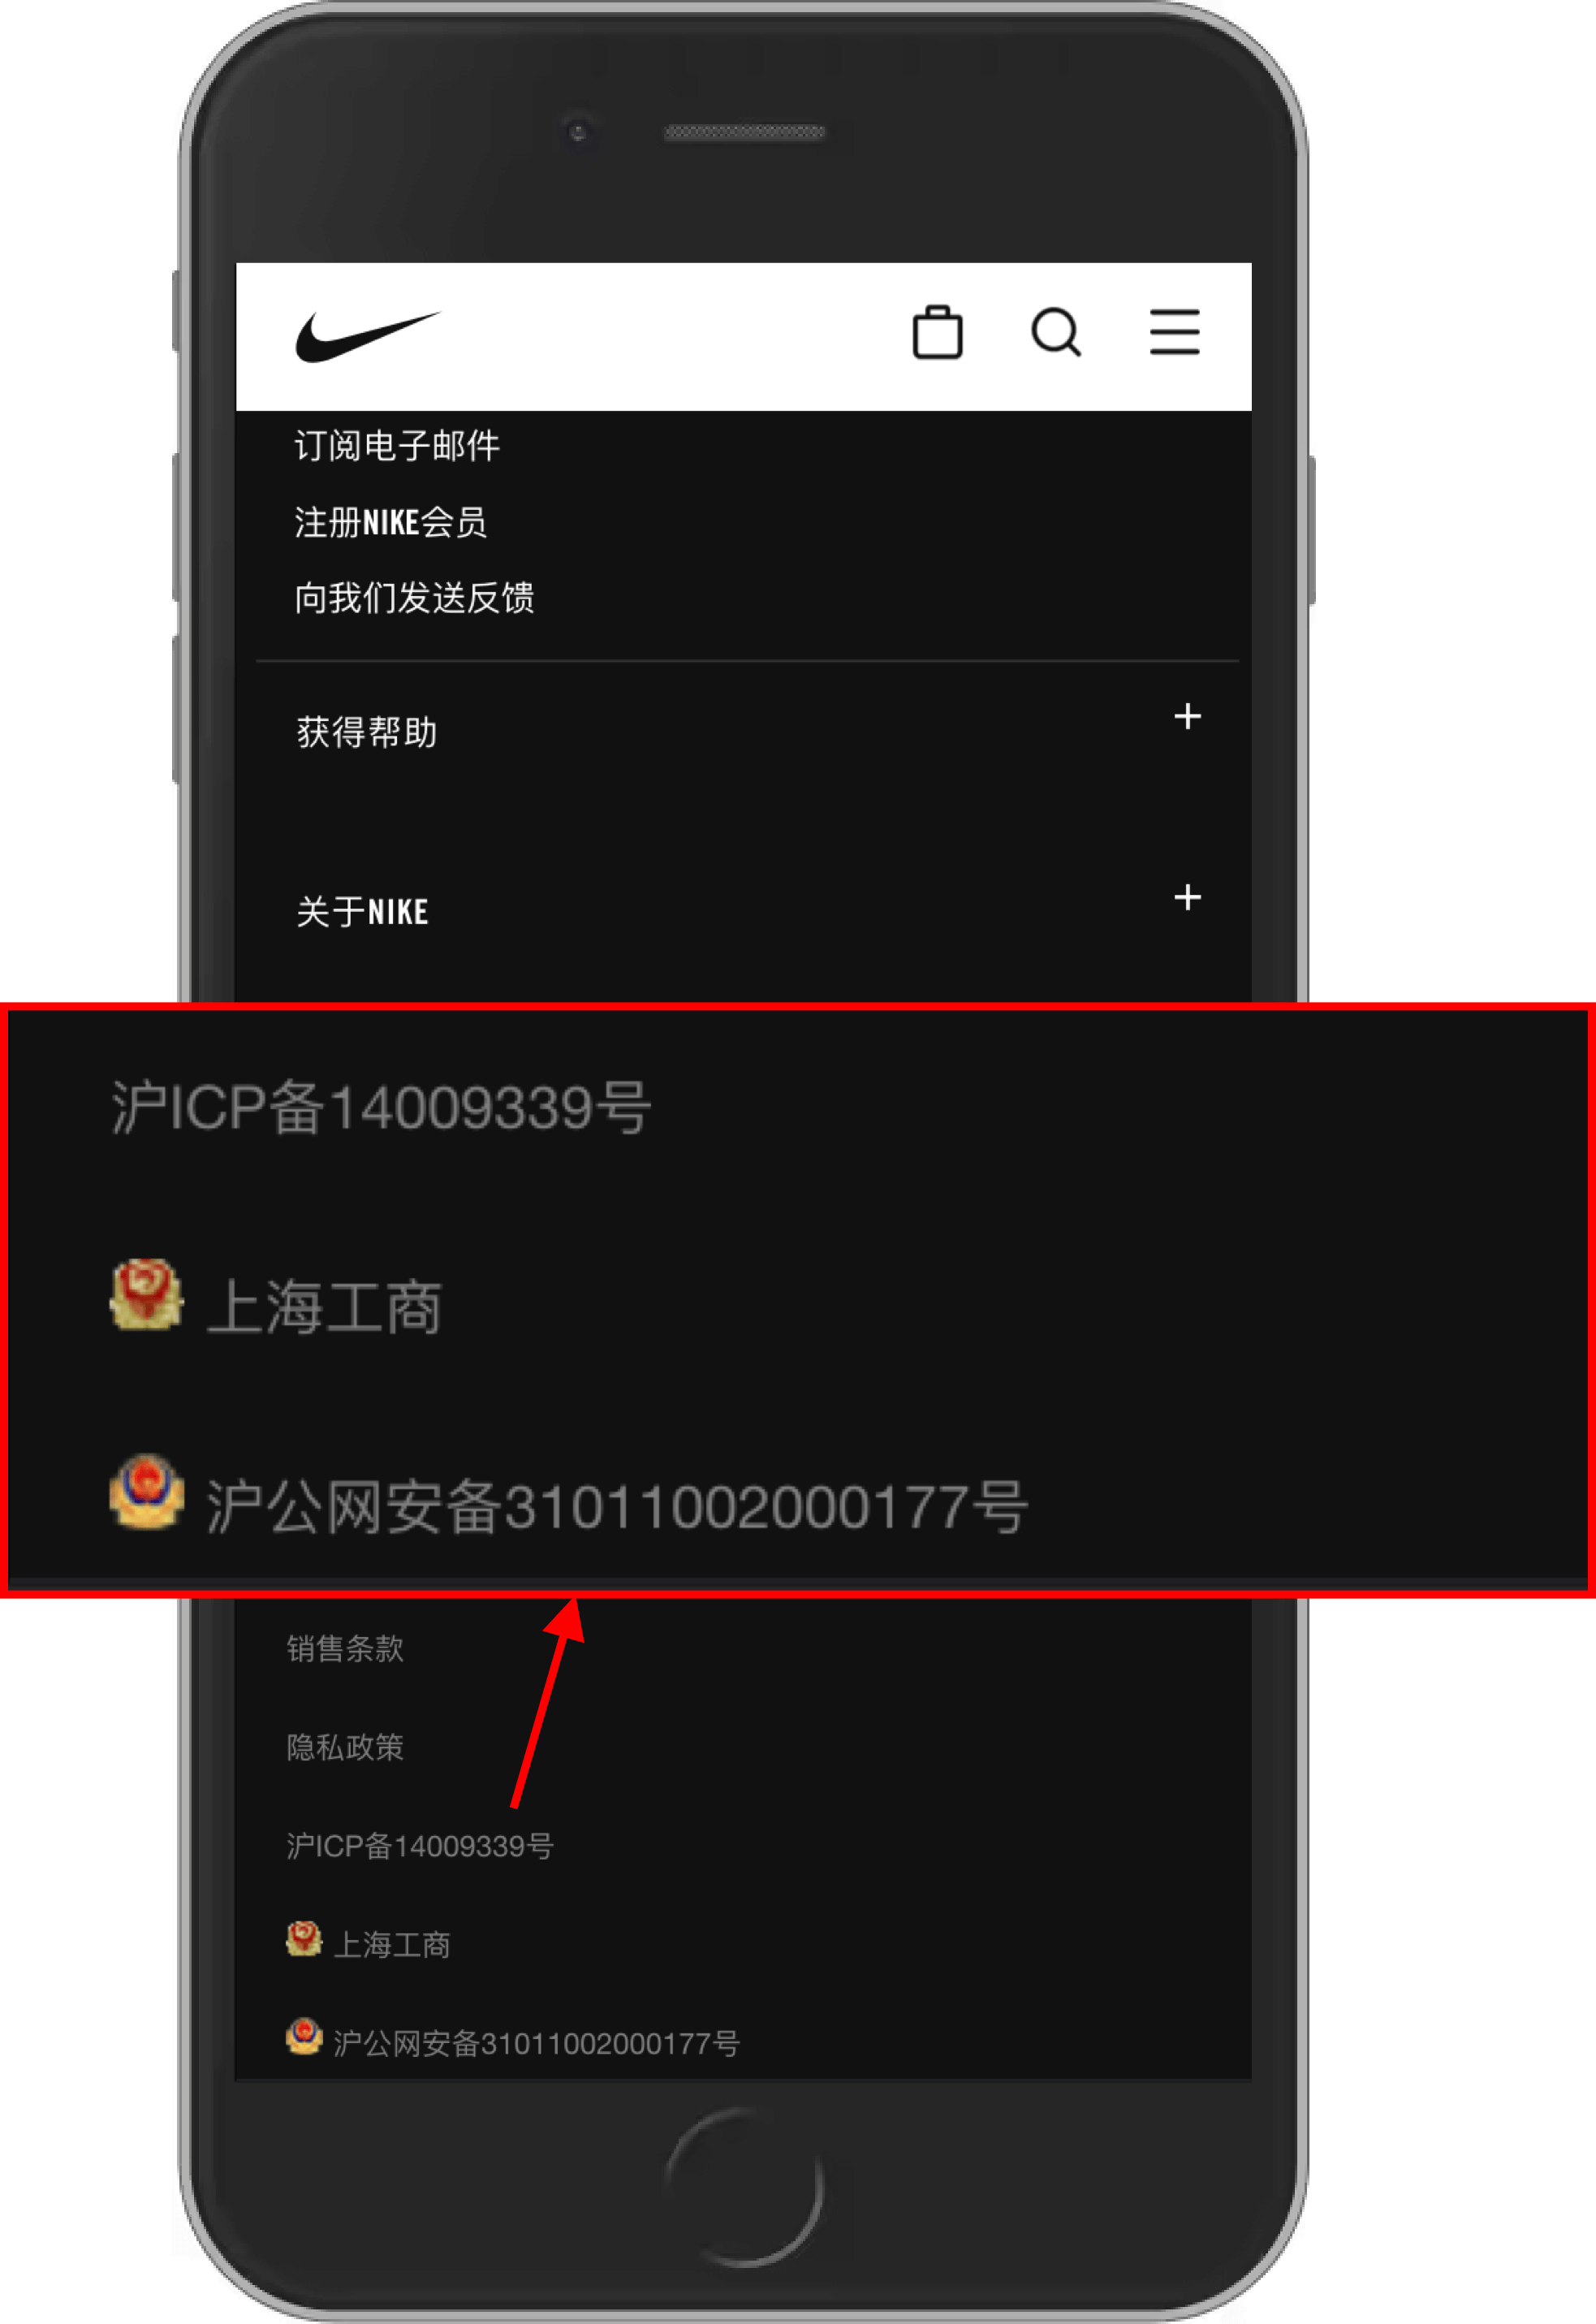 Screenshot to show Nike's website in China, with zoomed and highlighted ICP in red. You can find legal licenses showed at the footer of most legitimately hosted websites in China.